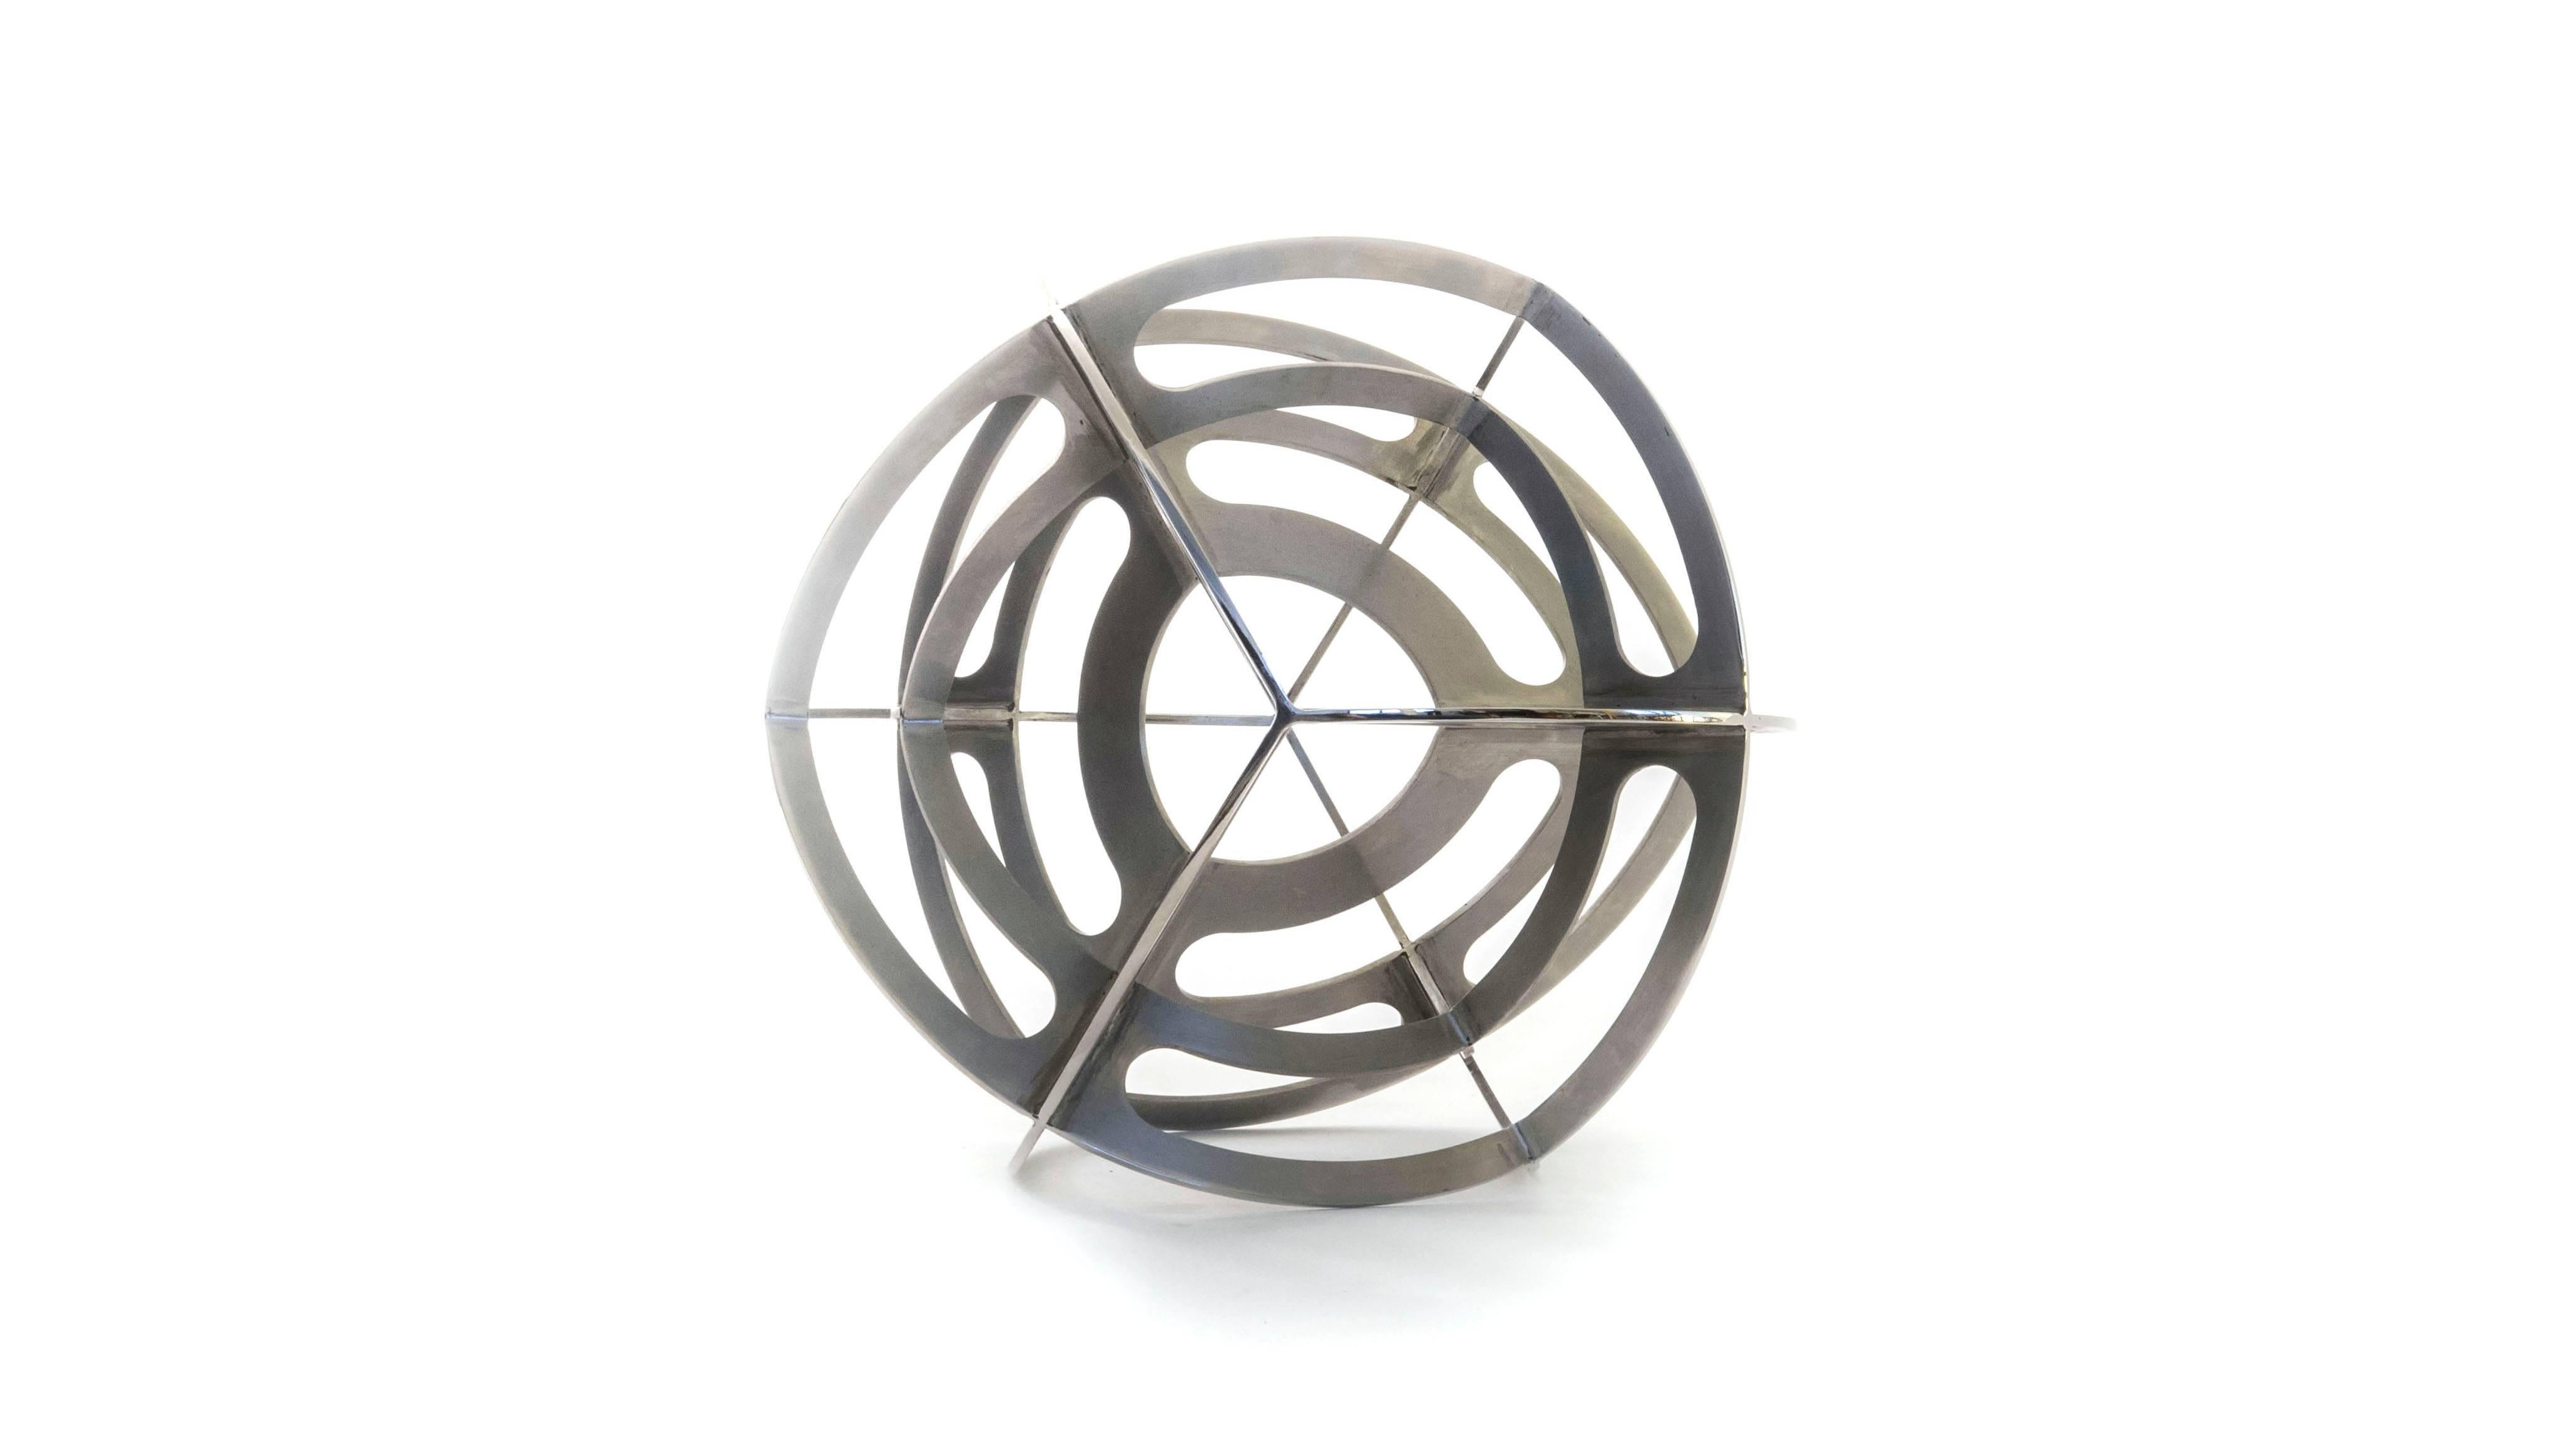 This is a limited edition stainless steel sculpture created by renowned Mexican designer Pedro Cerisola, whose work is in the permanent collection of the National Autonomous University Science Museum and has been exhibited in the Franz Mayer Design